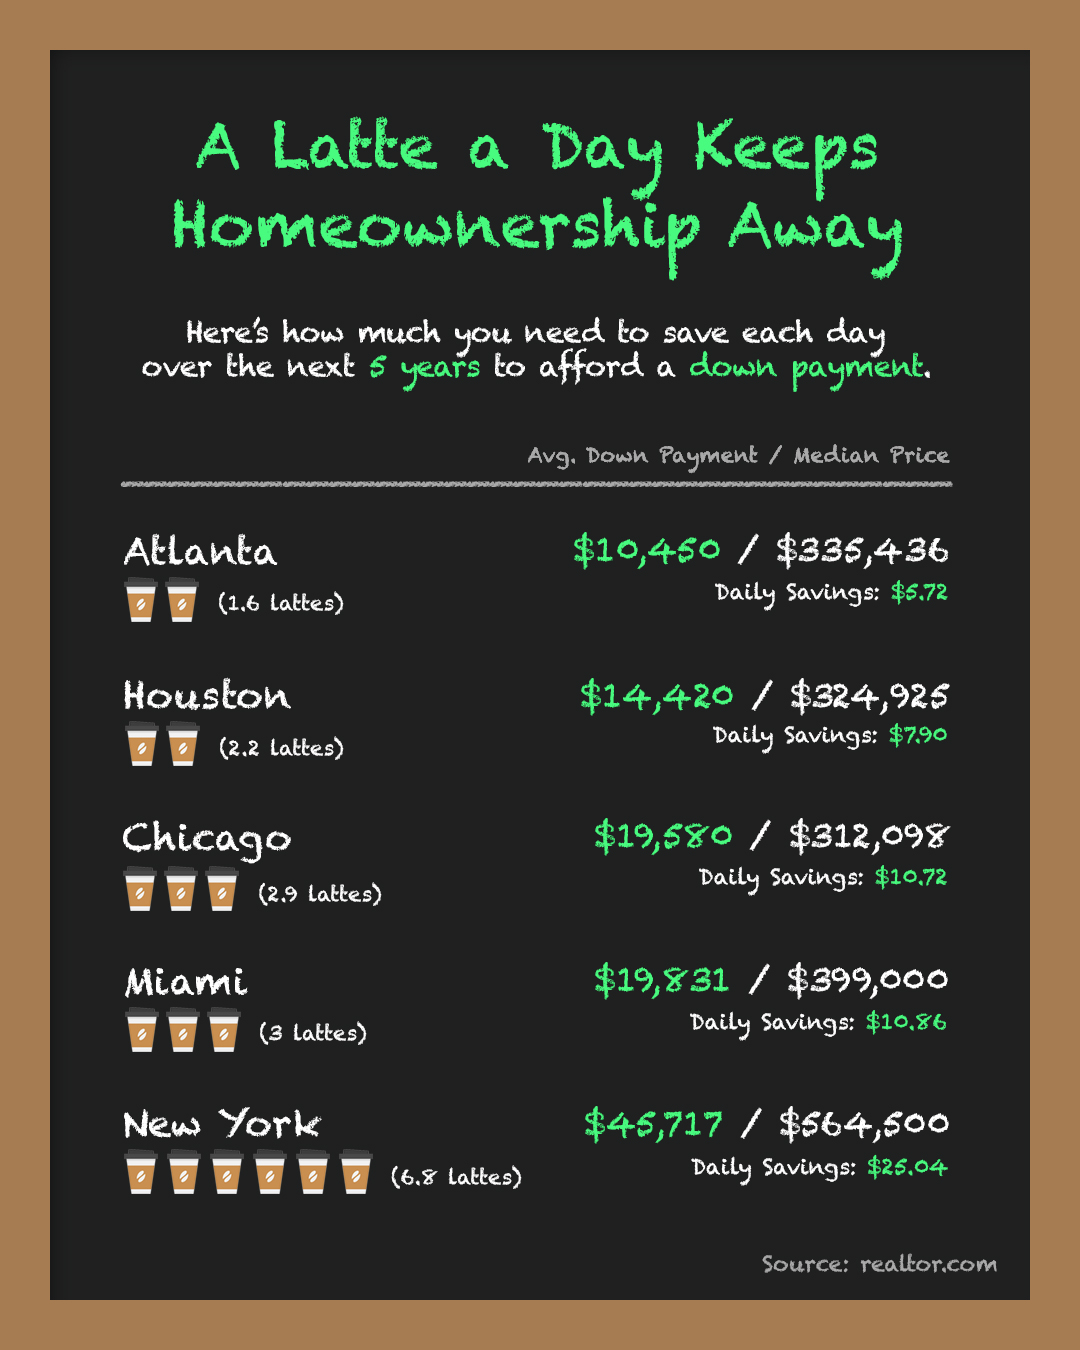 A Latte a Day Keeps Homeownership Away [INFOGRAPHIC] | Simplifying The Market